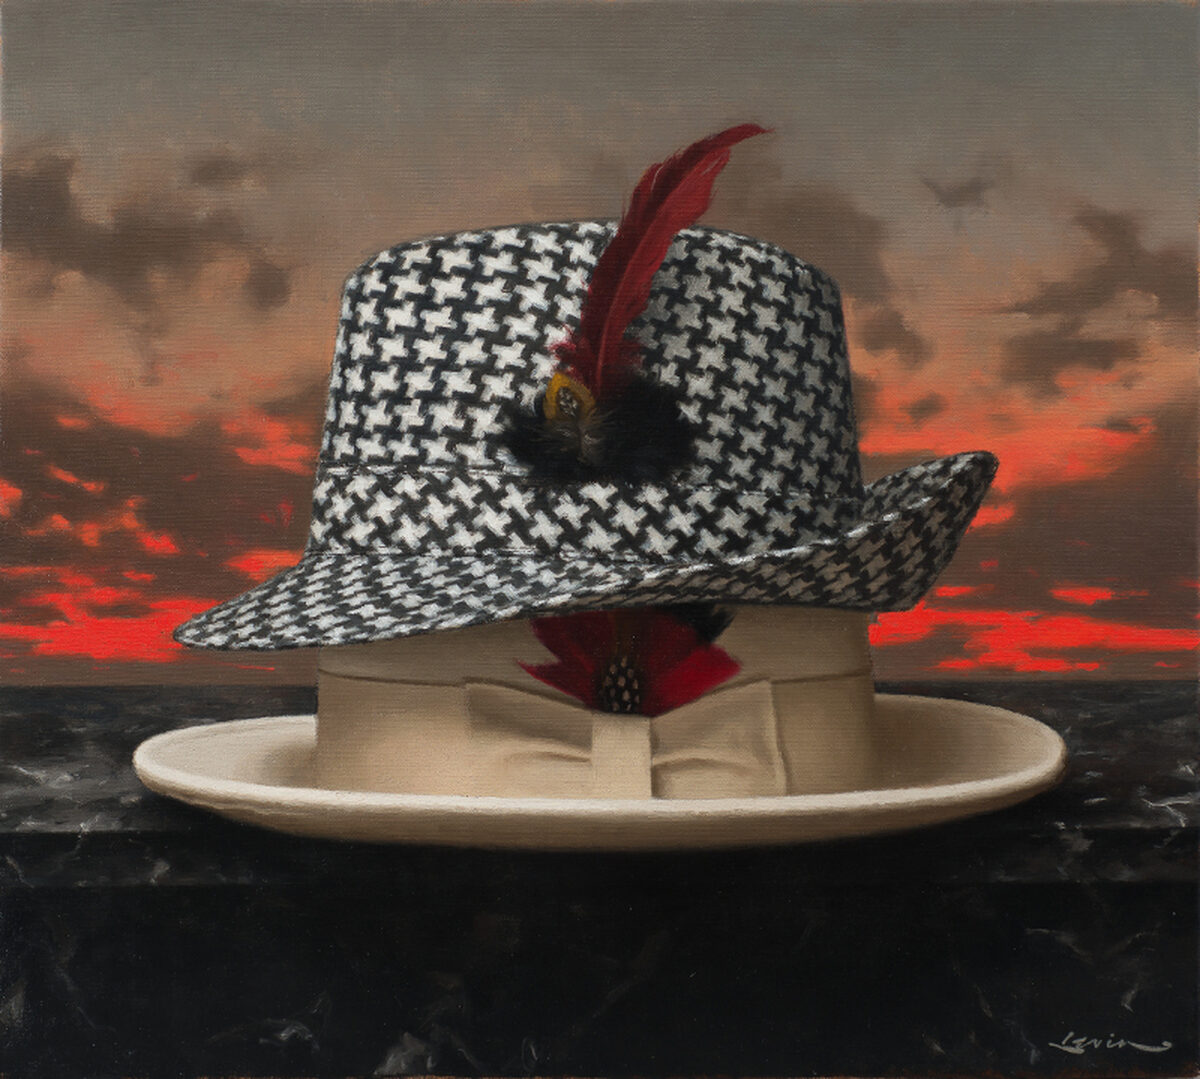 The Houndstooth Hat